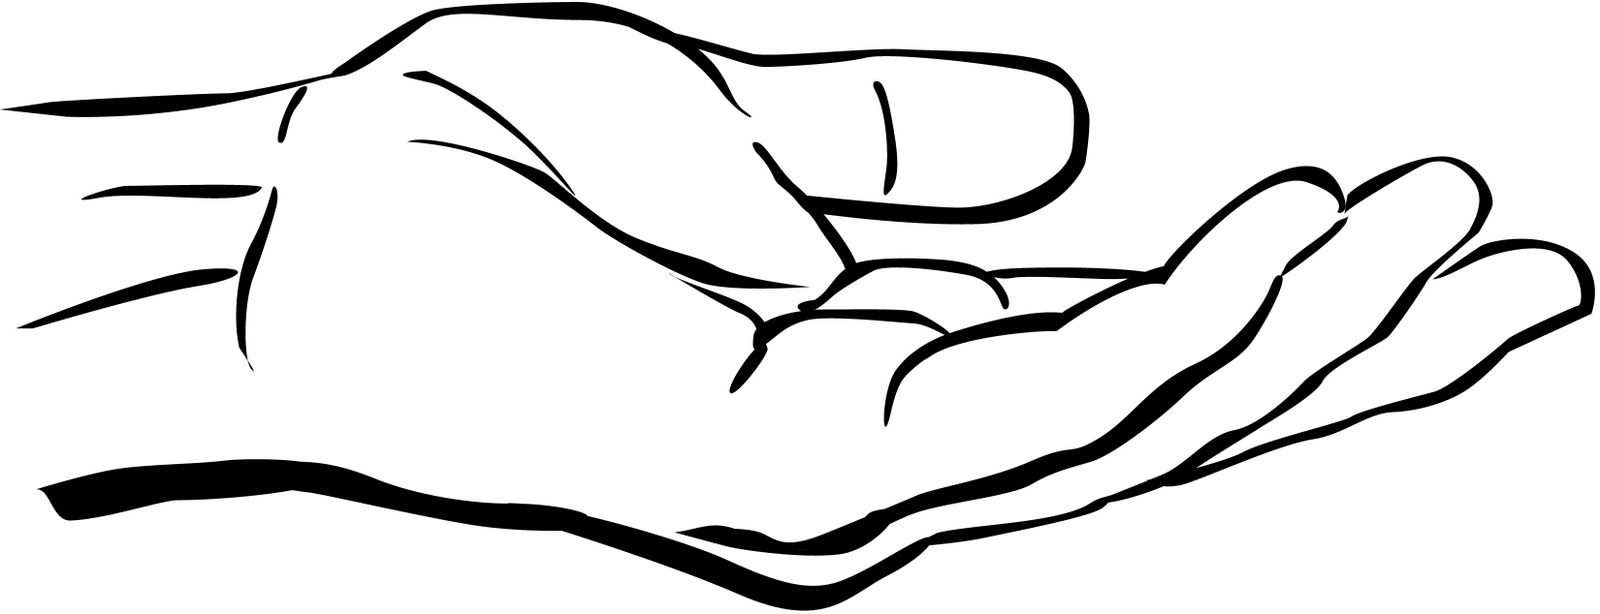 Arm clipart outstretched. Black and white hand